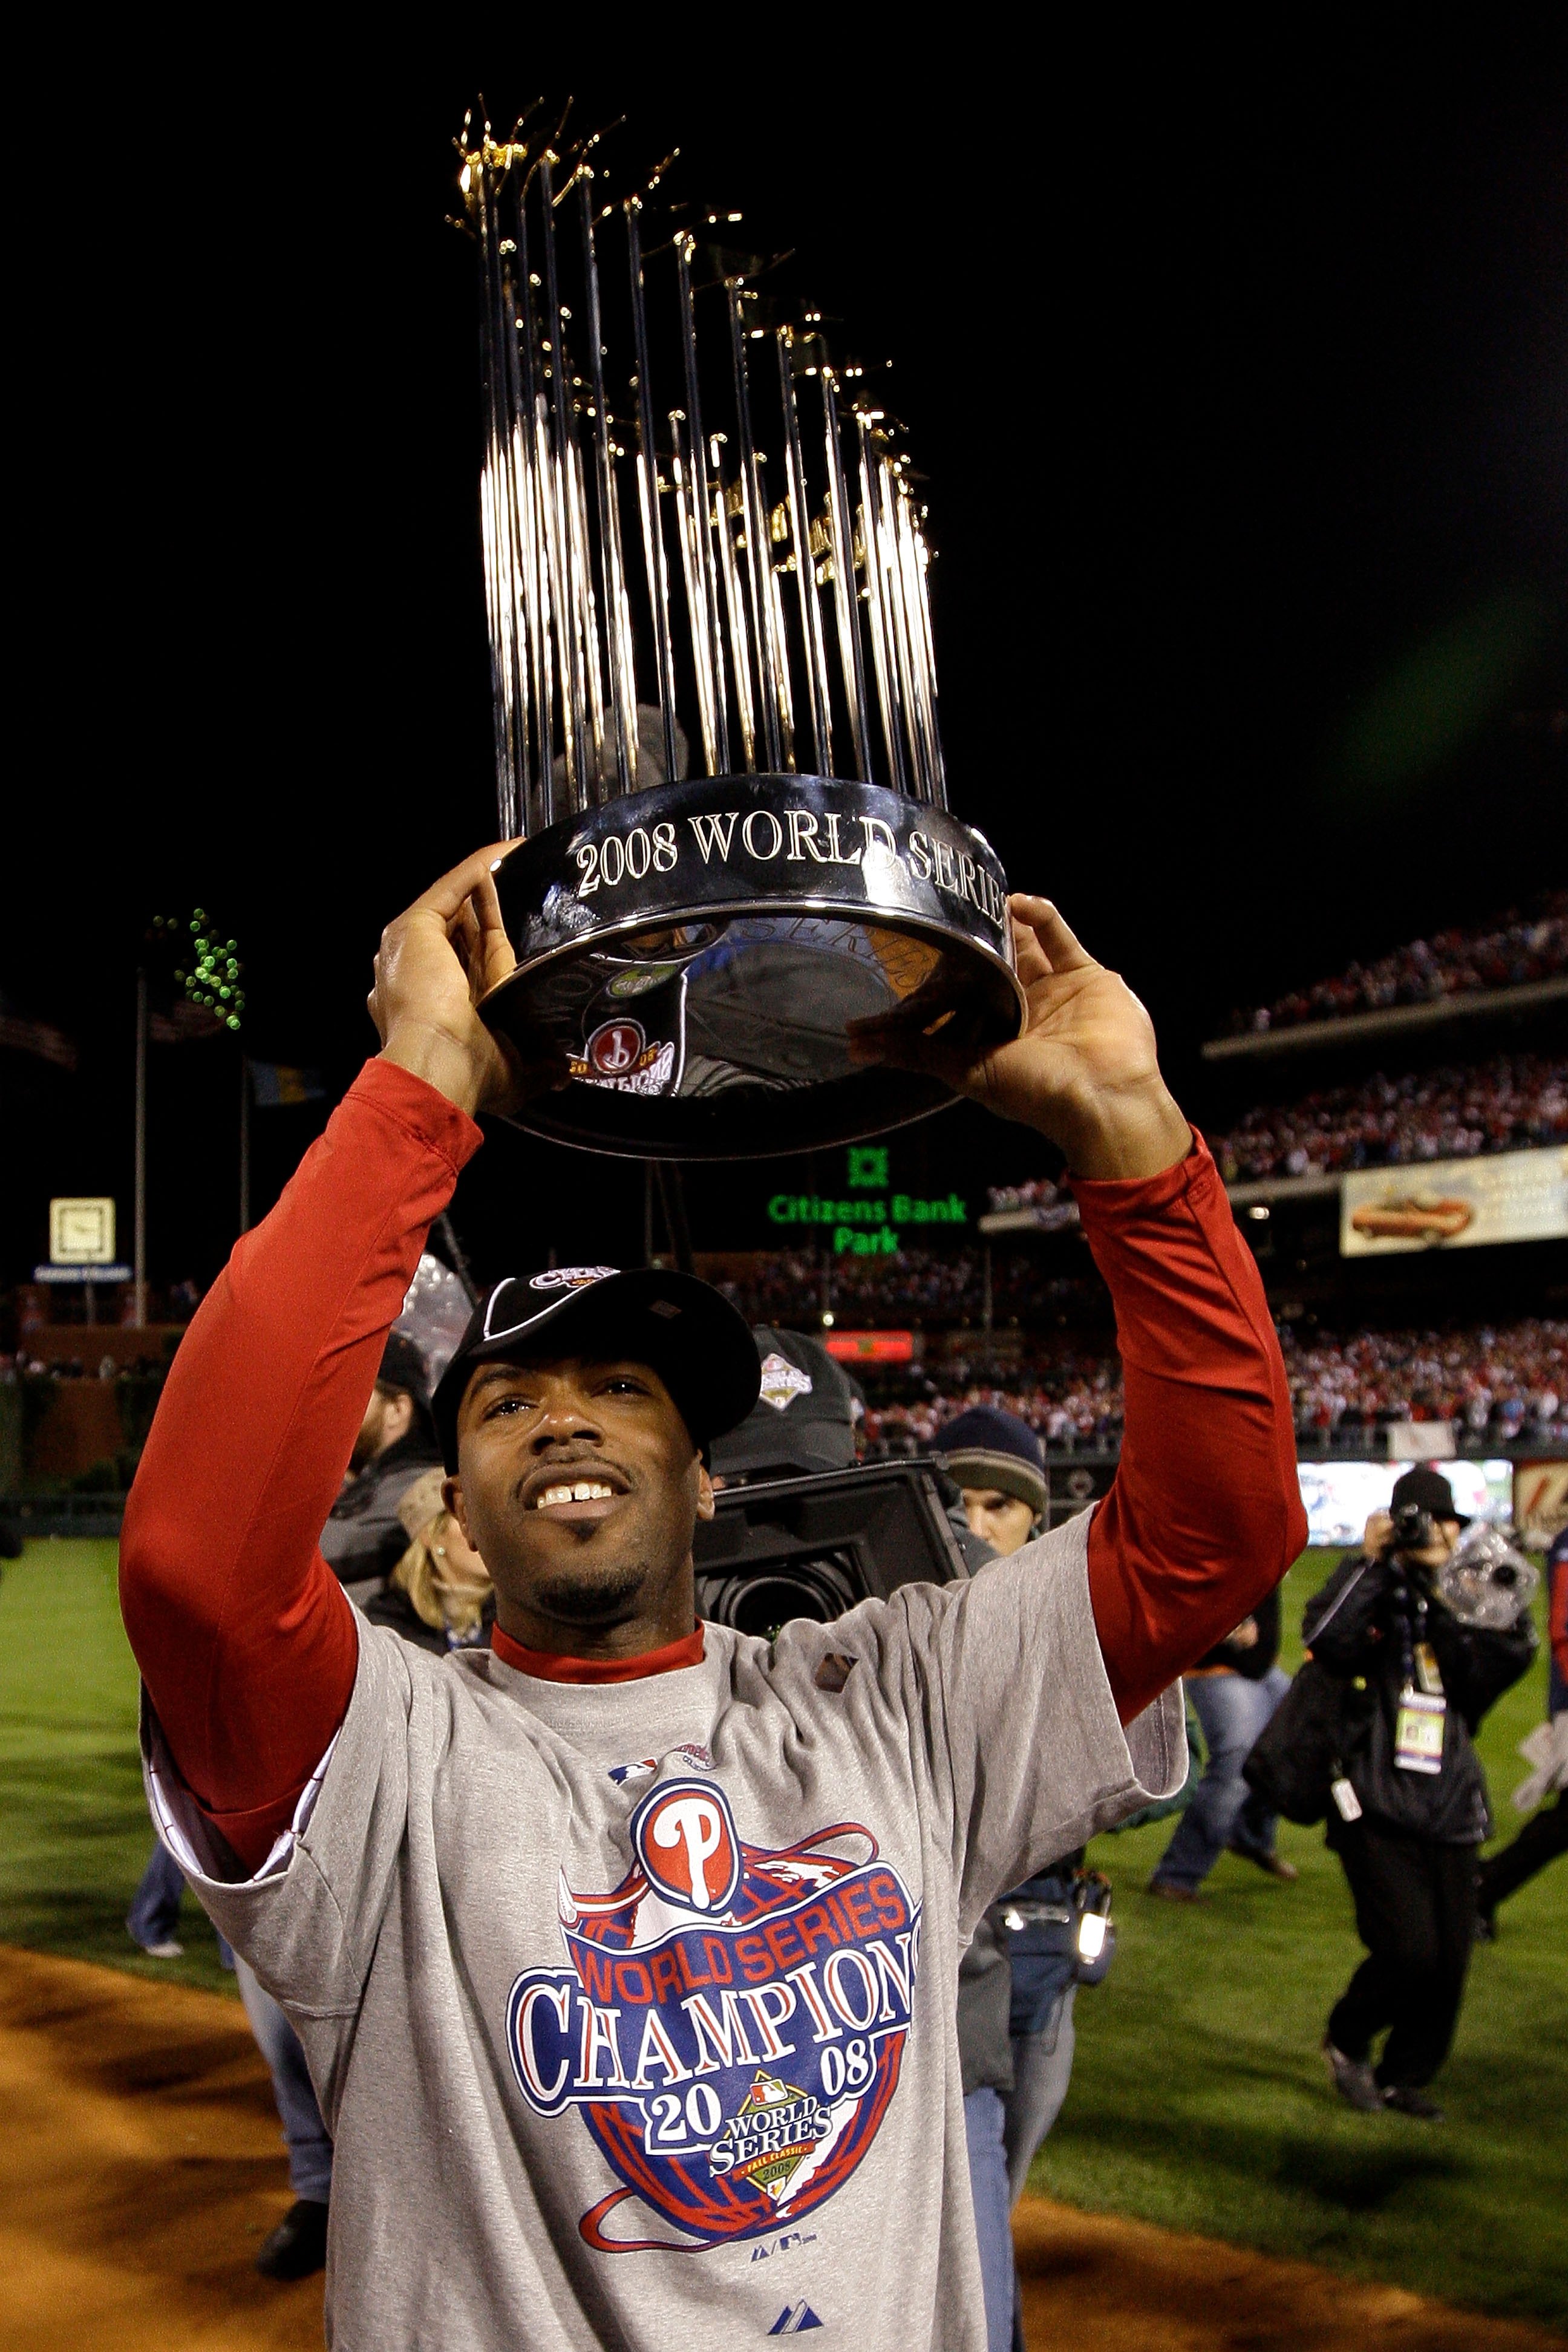 PHILADELPHIA - OCTOBER 29:  Jimmy Rollins #11 of the Philadelphia Phillies celebrates with the World Series Championship trophy after their 4-3 win against the Tampa Bay Rays during the continuation of game five of the 2008 MLB World Series on October 29,